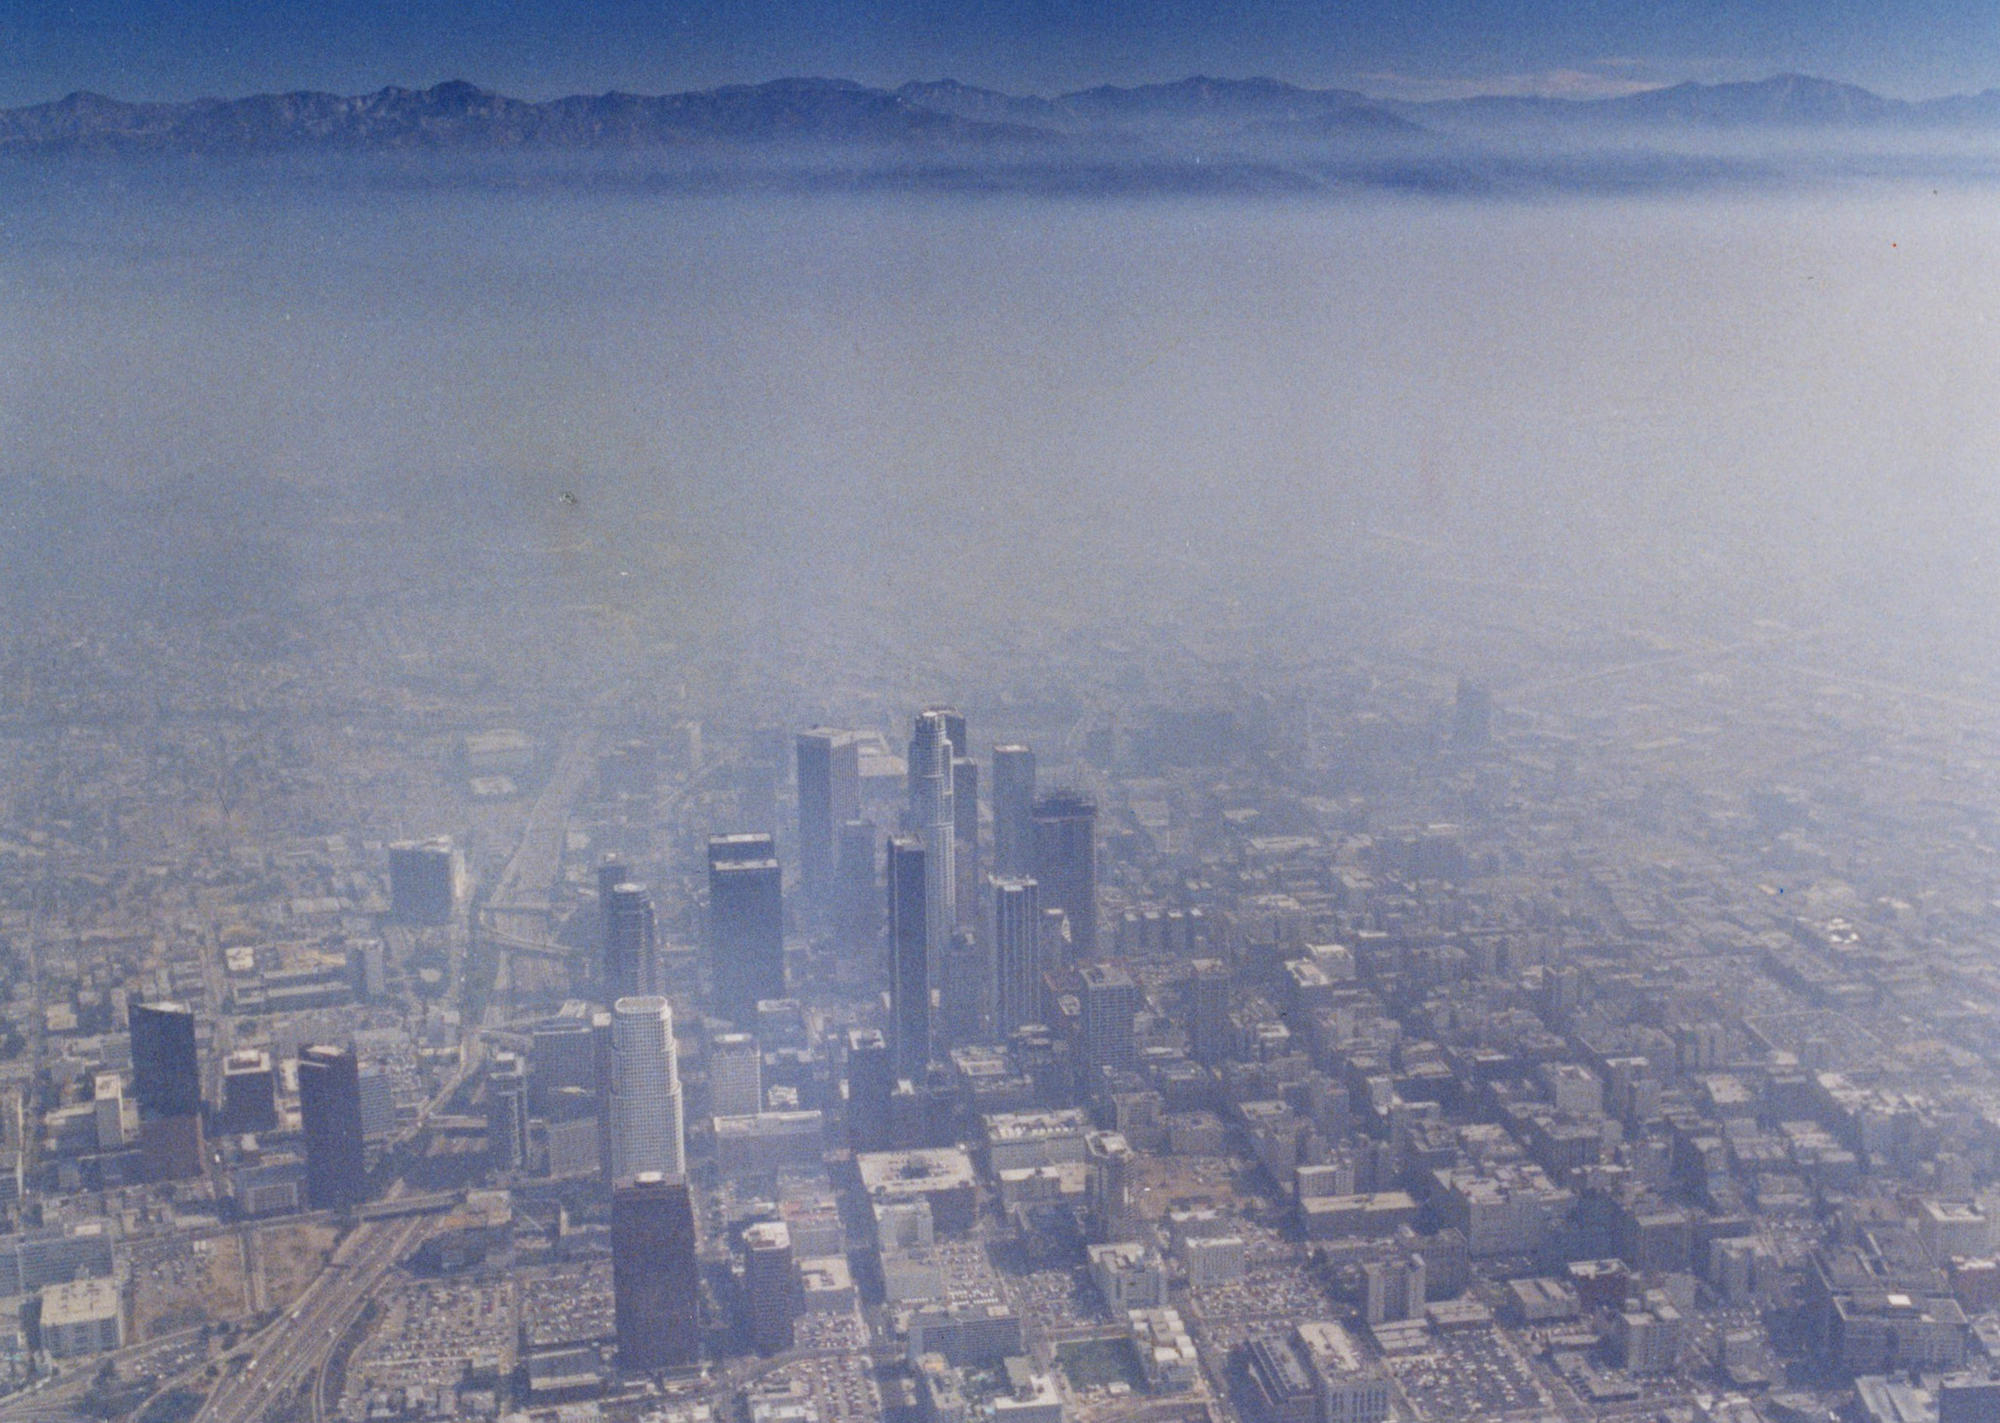 Aug. 30, 1990: An aerial view of the downtown Los Angeles skyline.